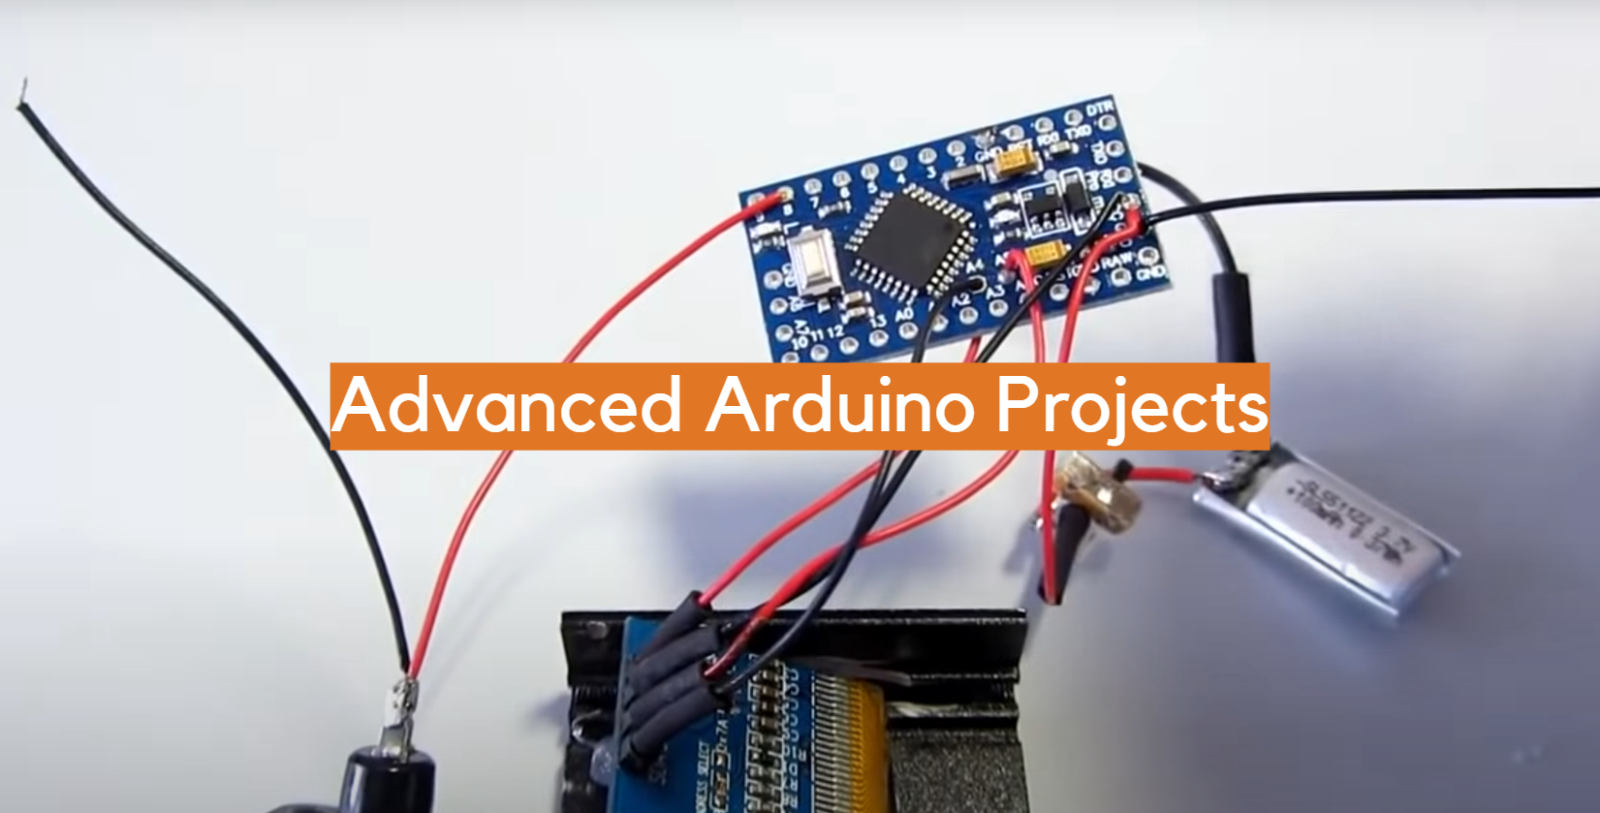 Advanced Arduino Projects